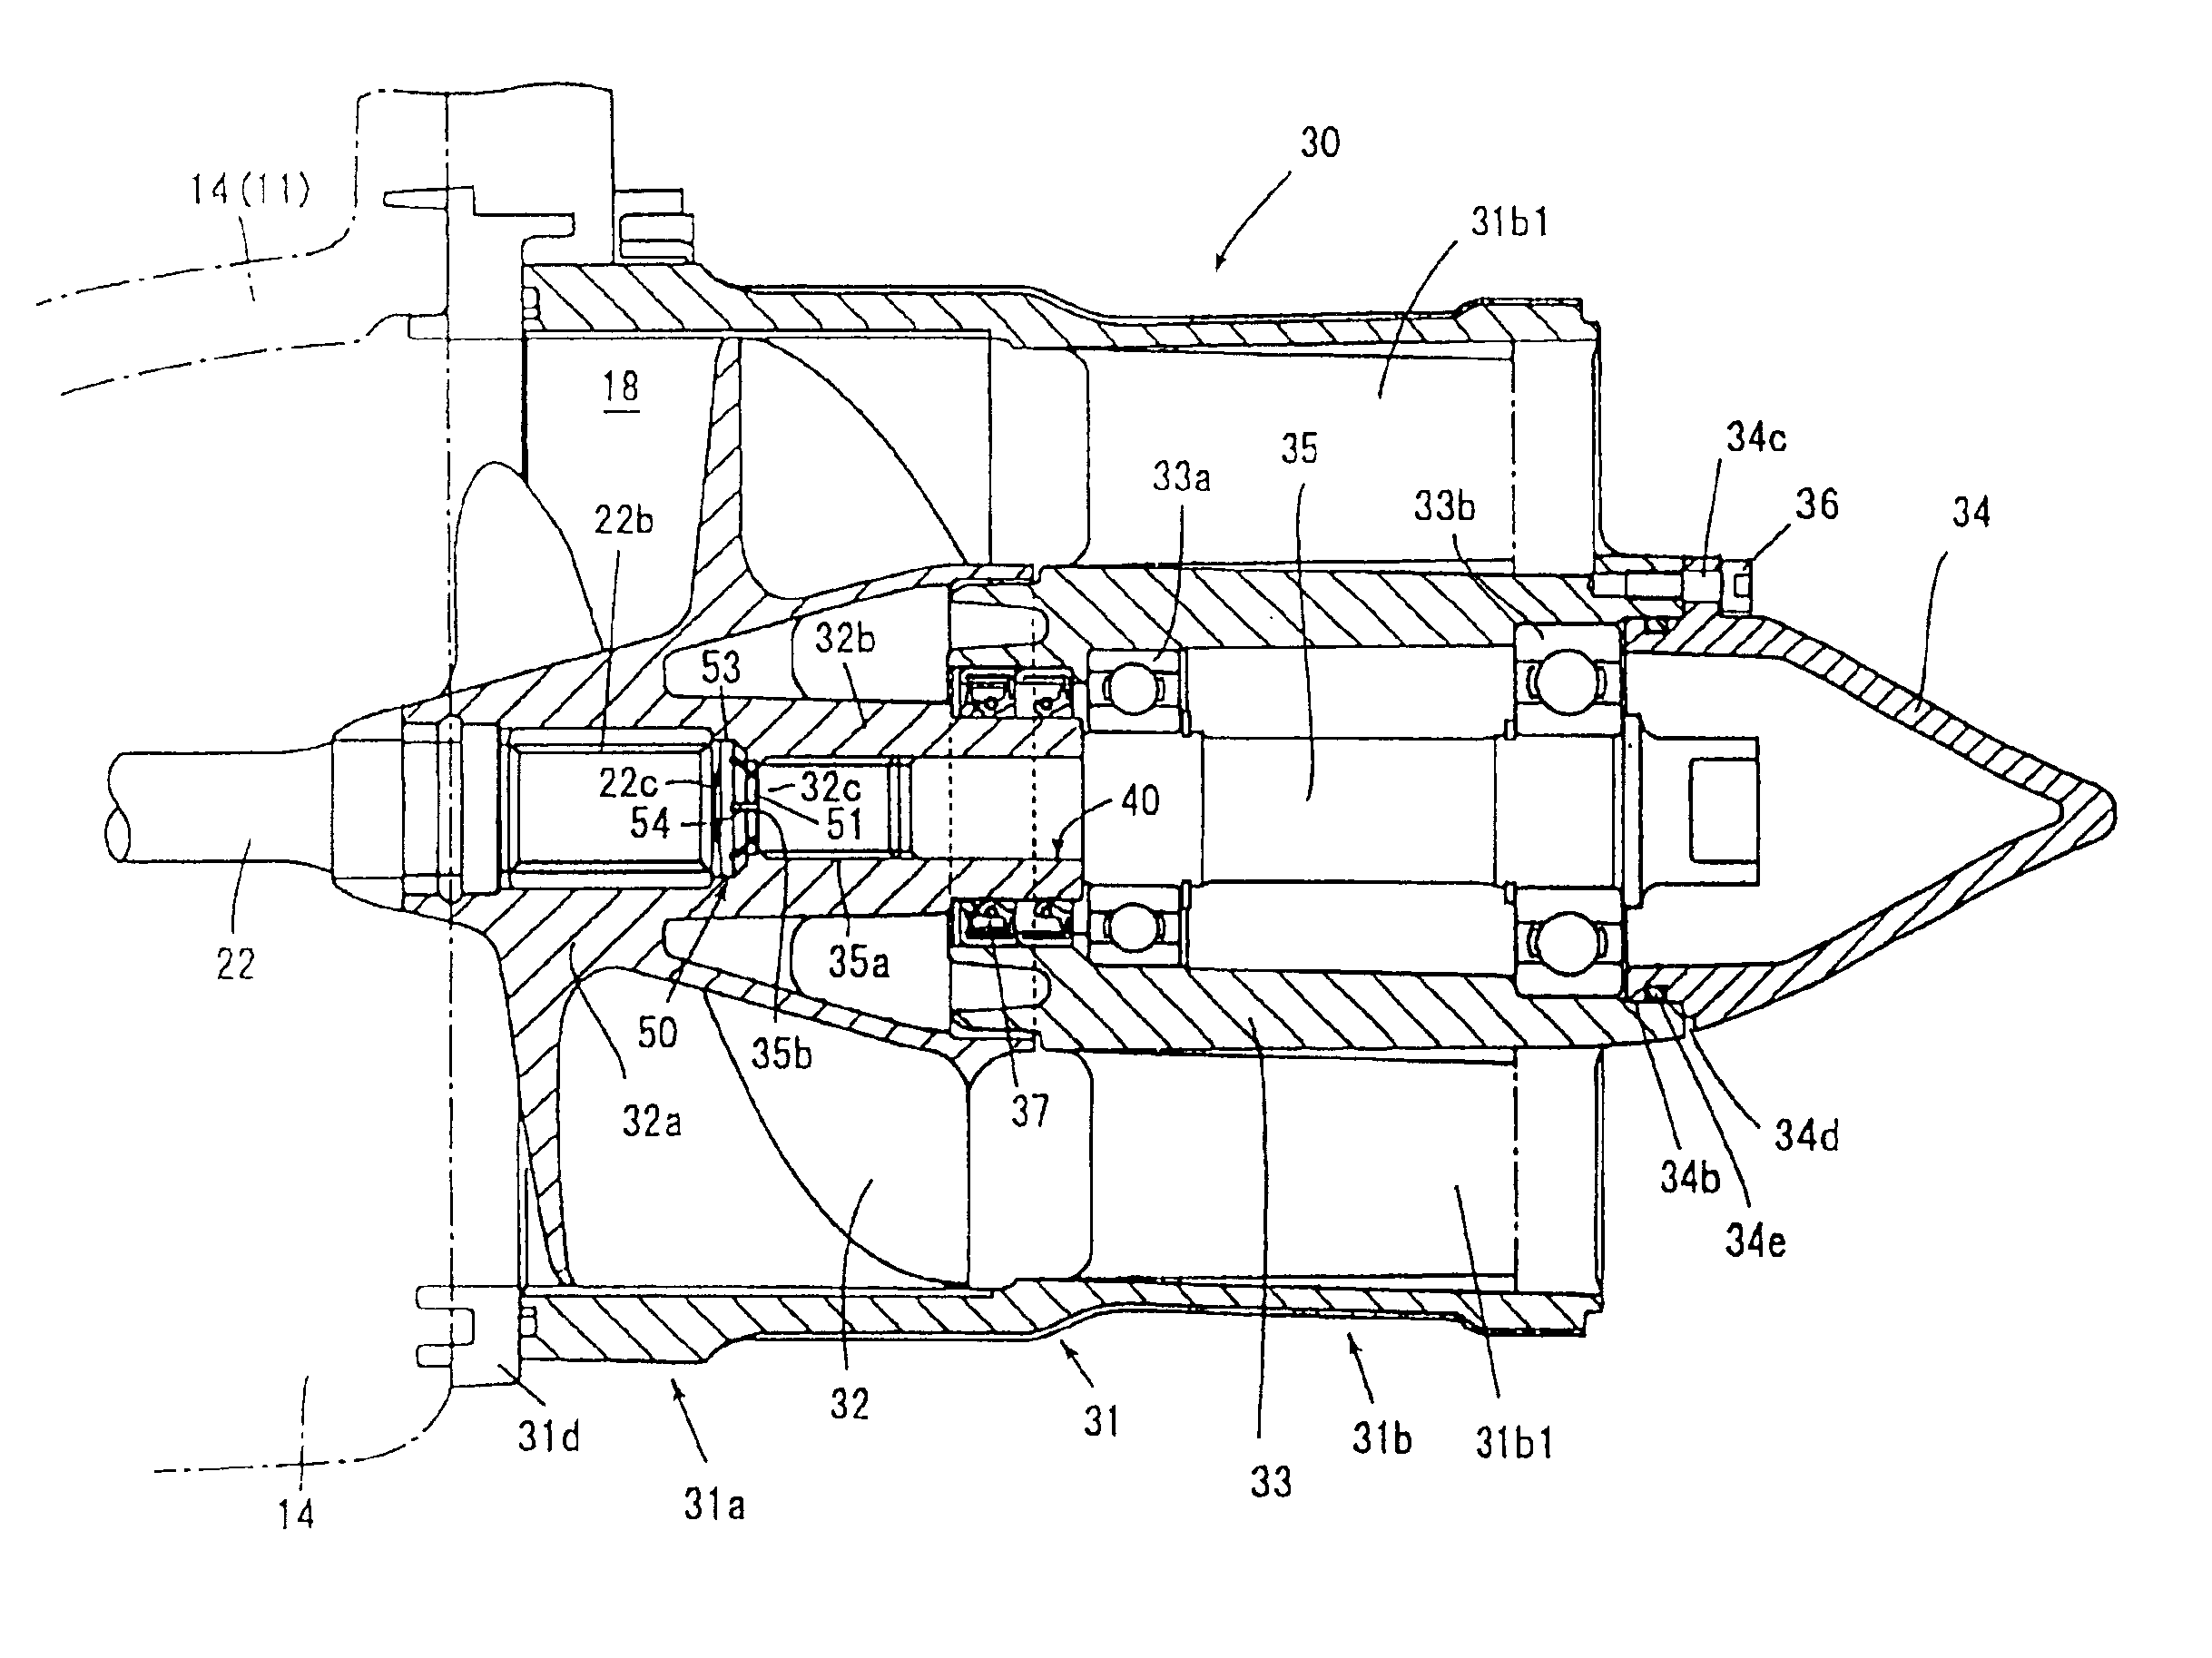 Water jet propeller apparatus for a personal watercraft